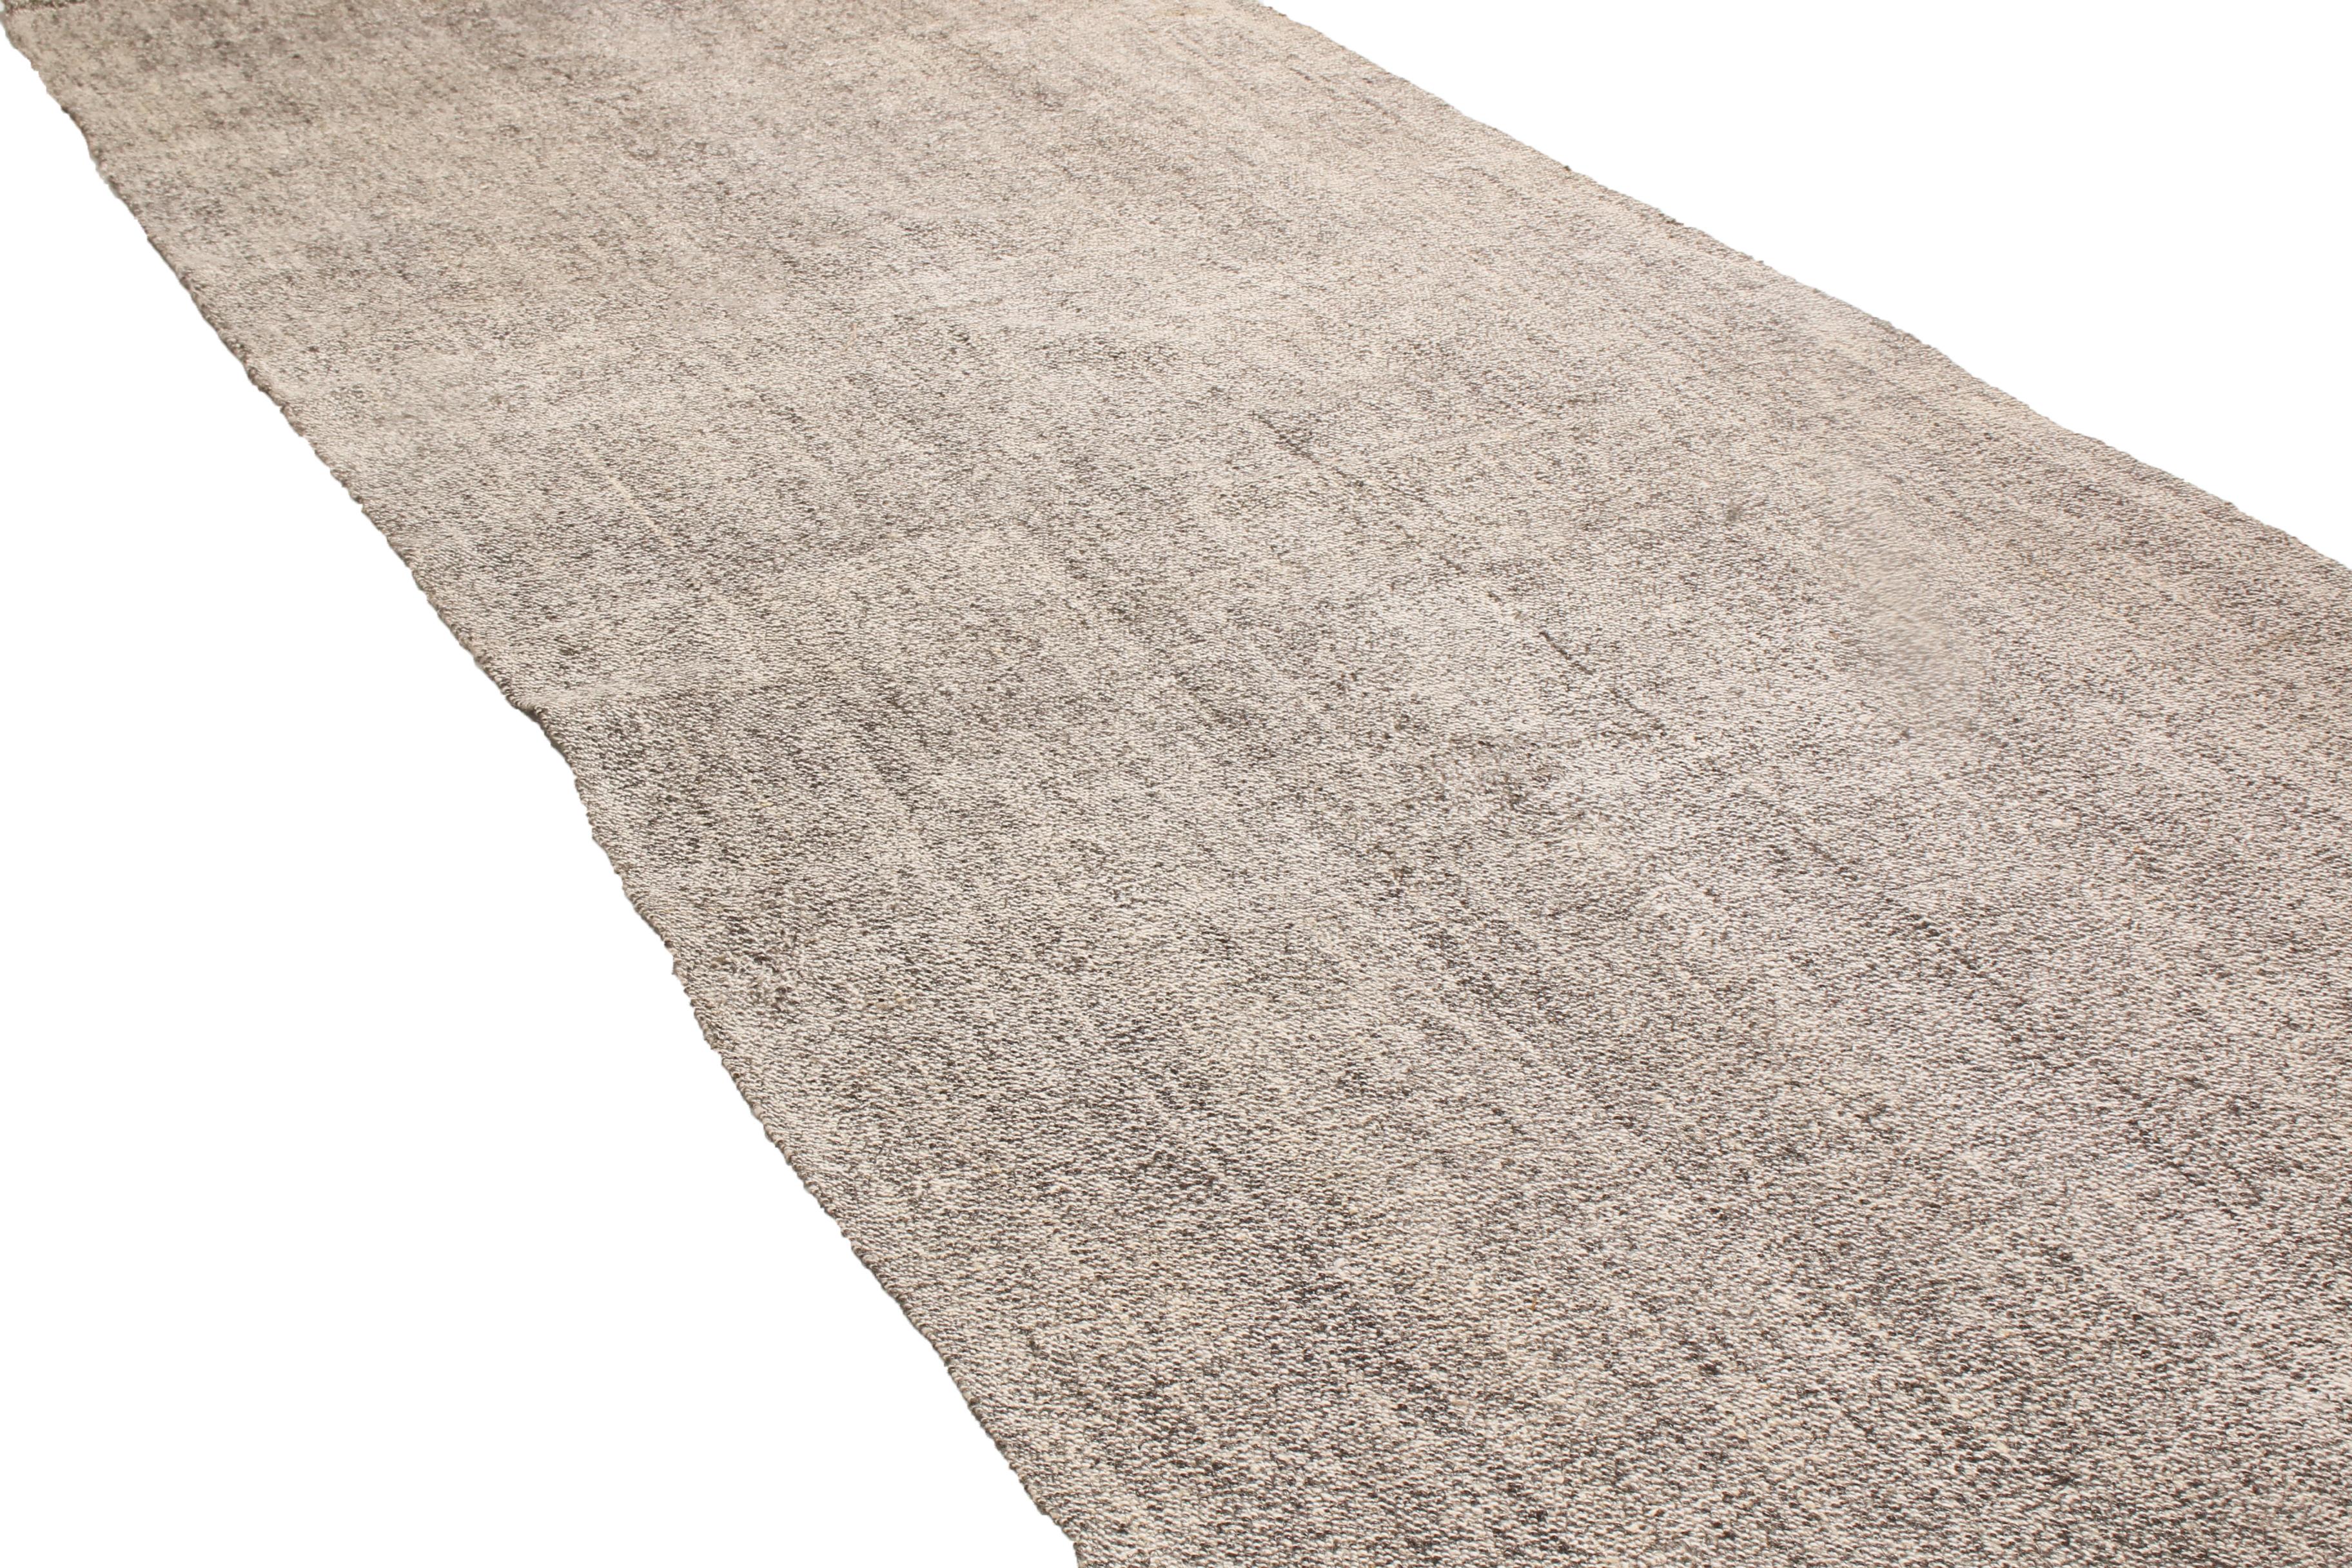 Originating from Turkey in 1960, this vintage wool Kilim runner is flat-woven in high quality wool with subtly rectilinear, vertically oriented abrash of Industrial and metallic gray and silver colorways.
 